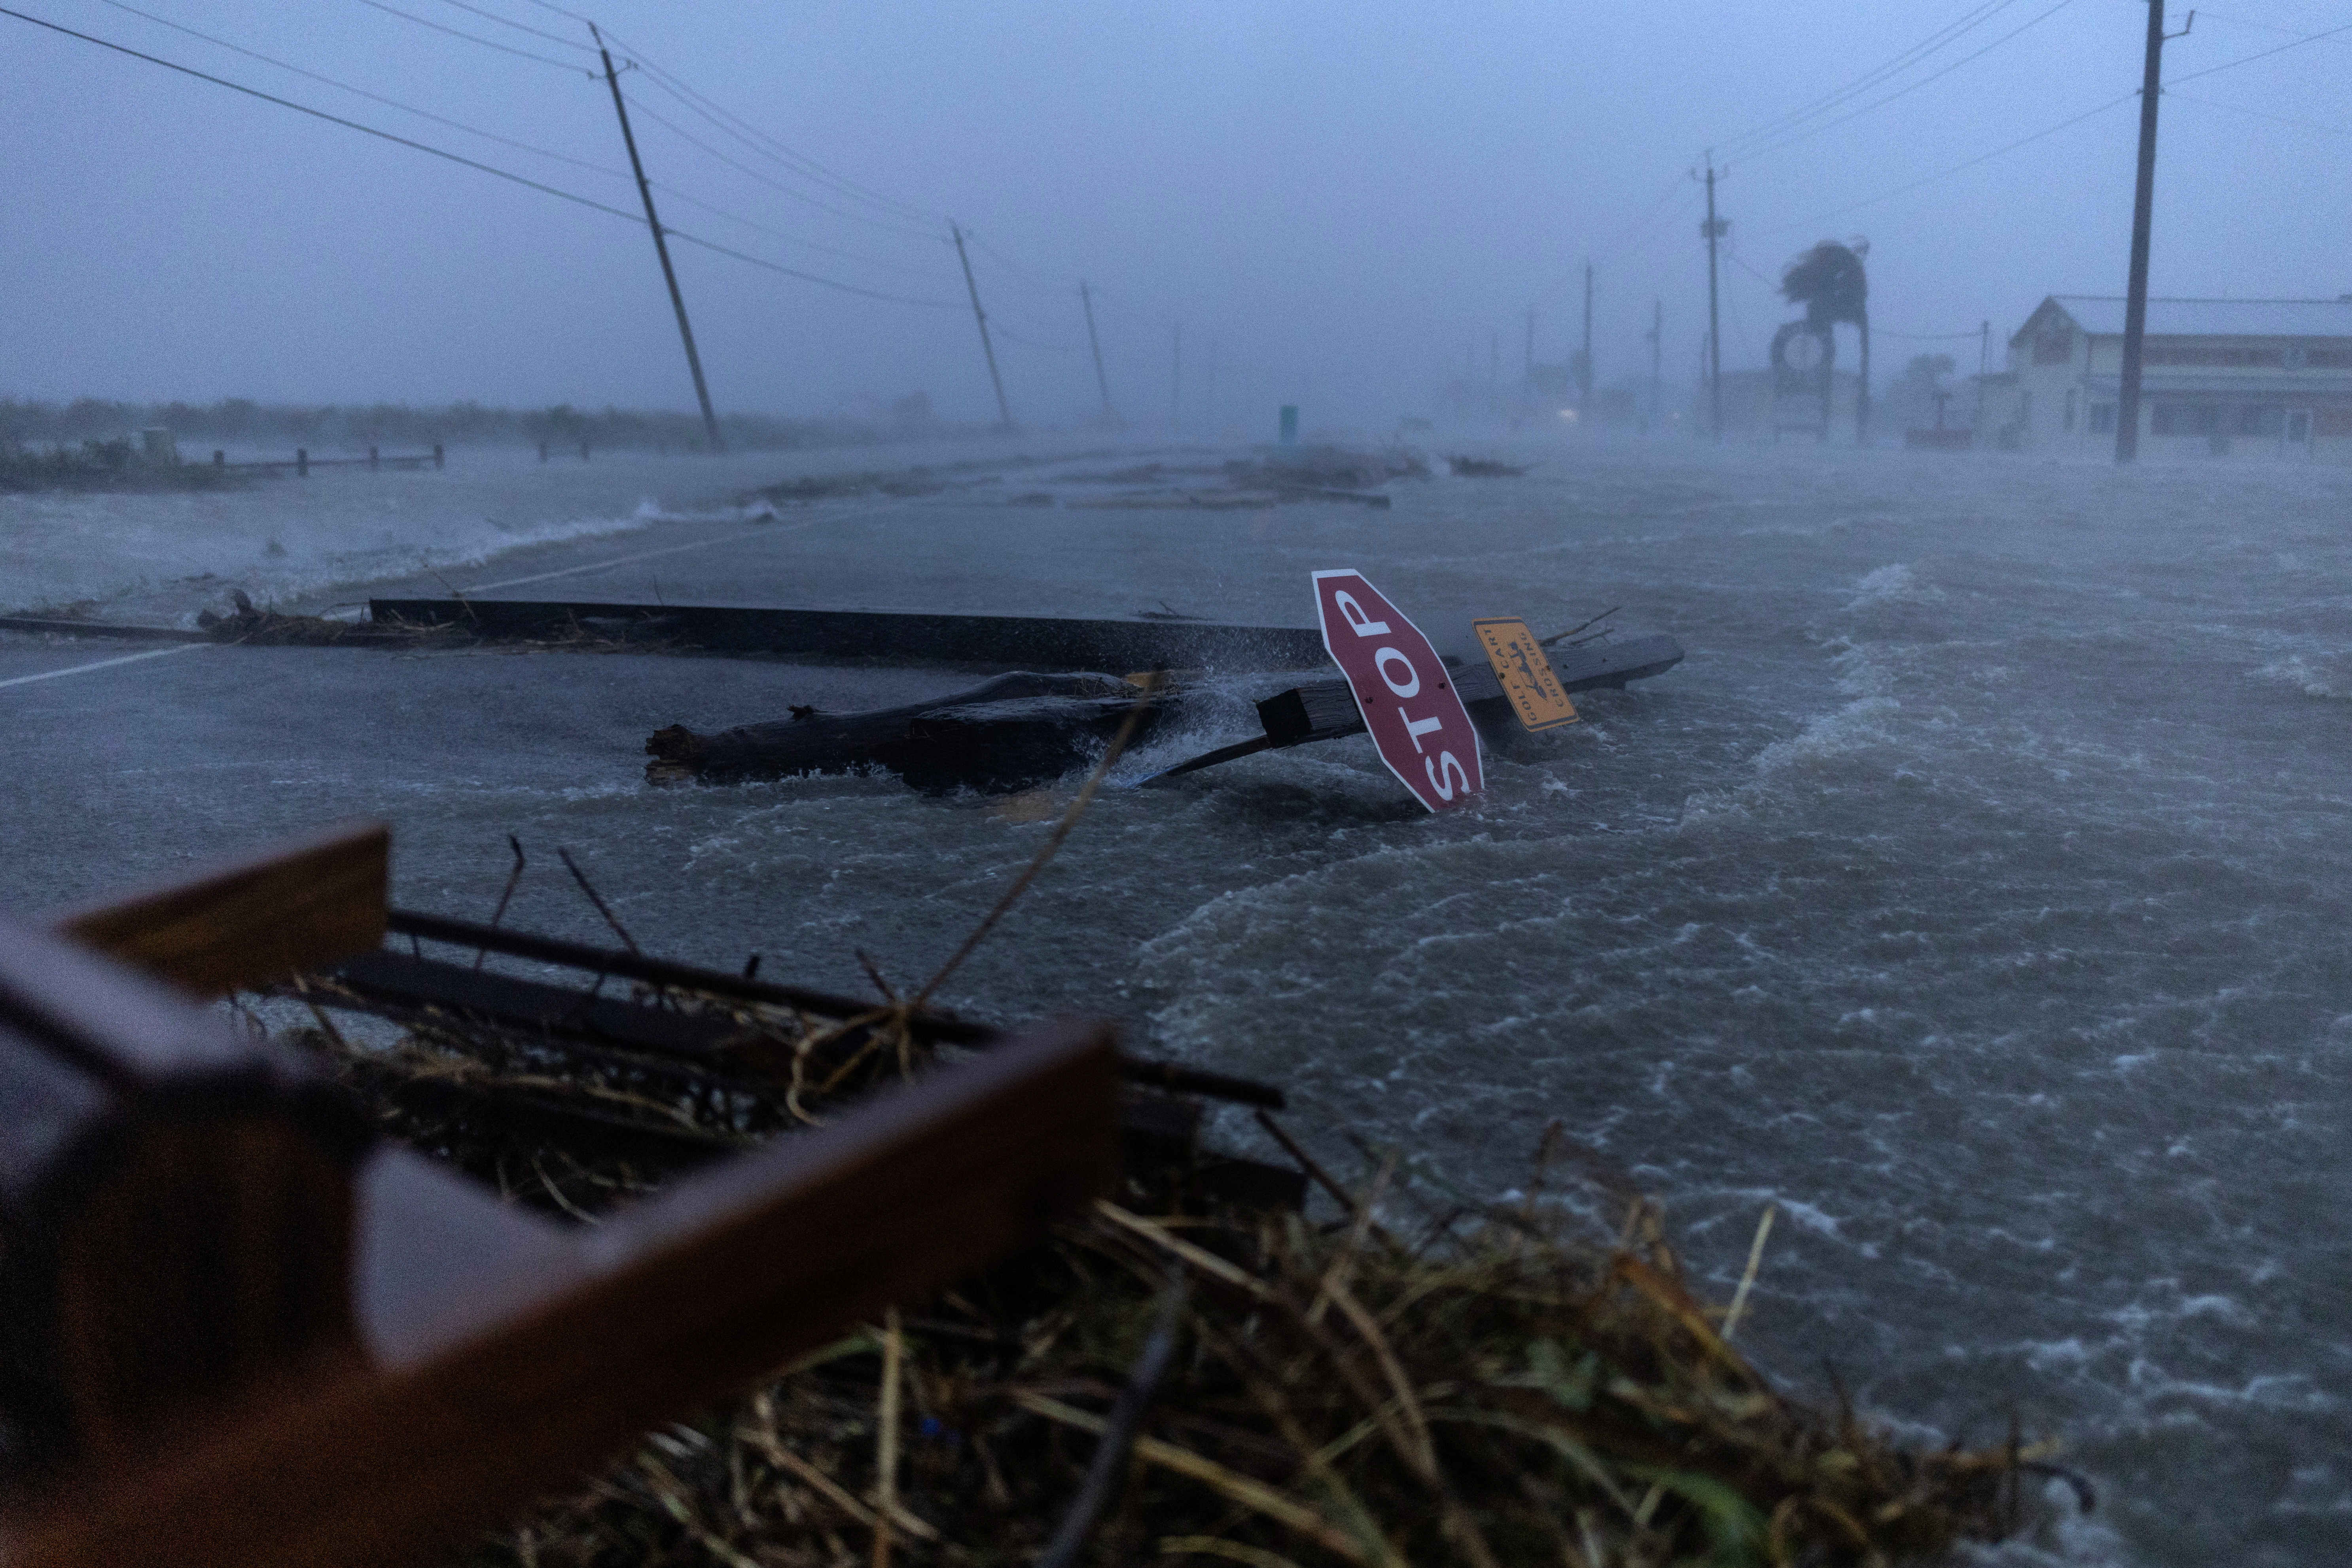 Debris and flood waters from Hurricane Beryl cover the main roadway in Surfside Beach, Texas